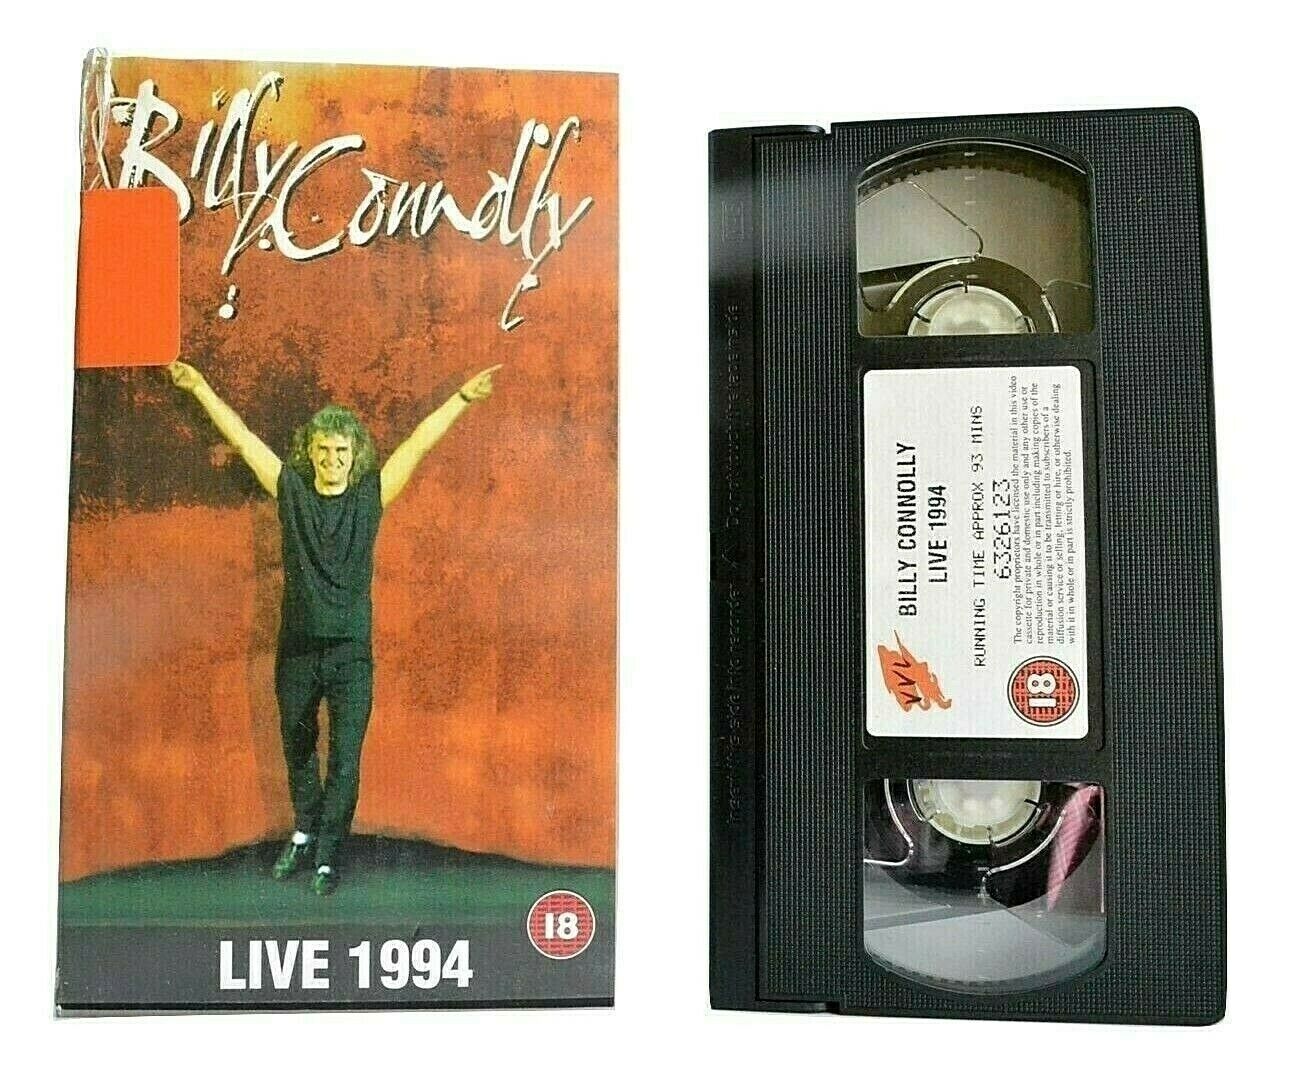 Billy Connolly: Live 1994 - Stand-Up Comedy - Hammersmith Apollo/London - VHS-